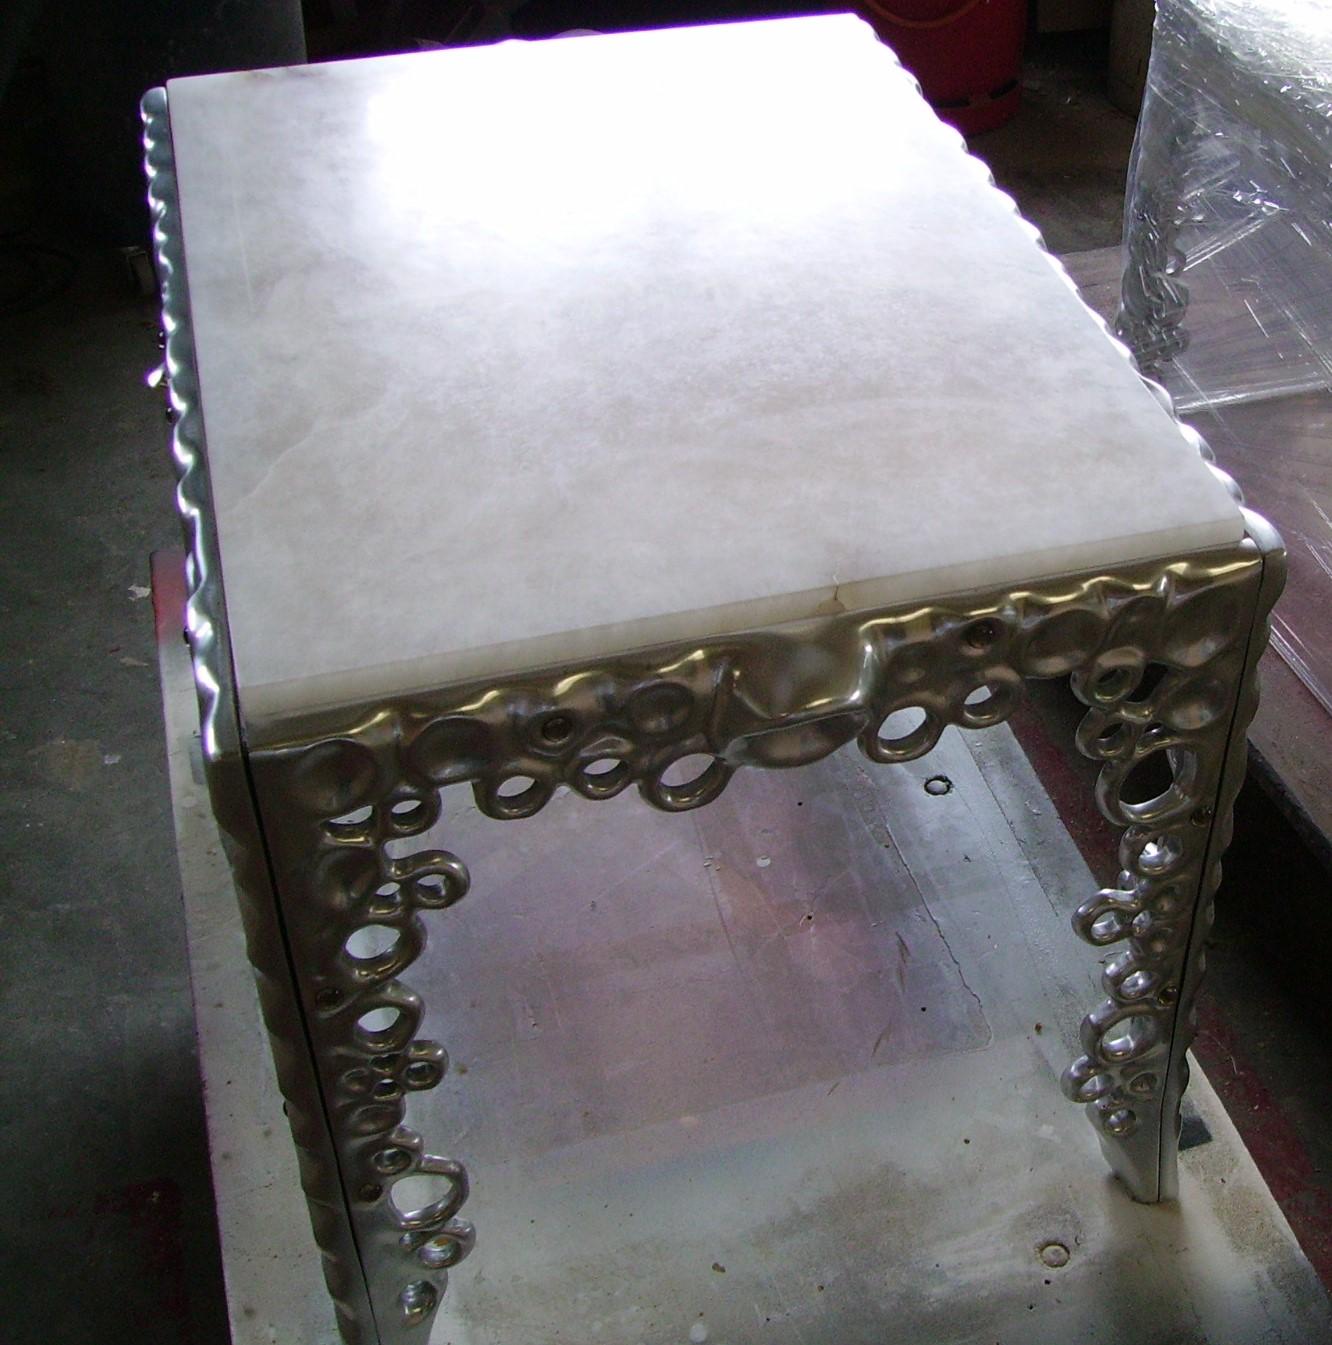 Side table. Coffee table.
Cast aluminum. Alabaster.
Dimensions: L 70 cm, P 49 cm, H 50 cm.
Signed piece of an edition of 20.
Delivery time: 8 weeks.

Pricing does not include sales tax (French VAT) if applicable.